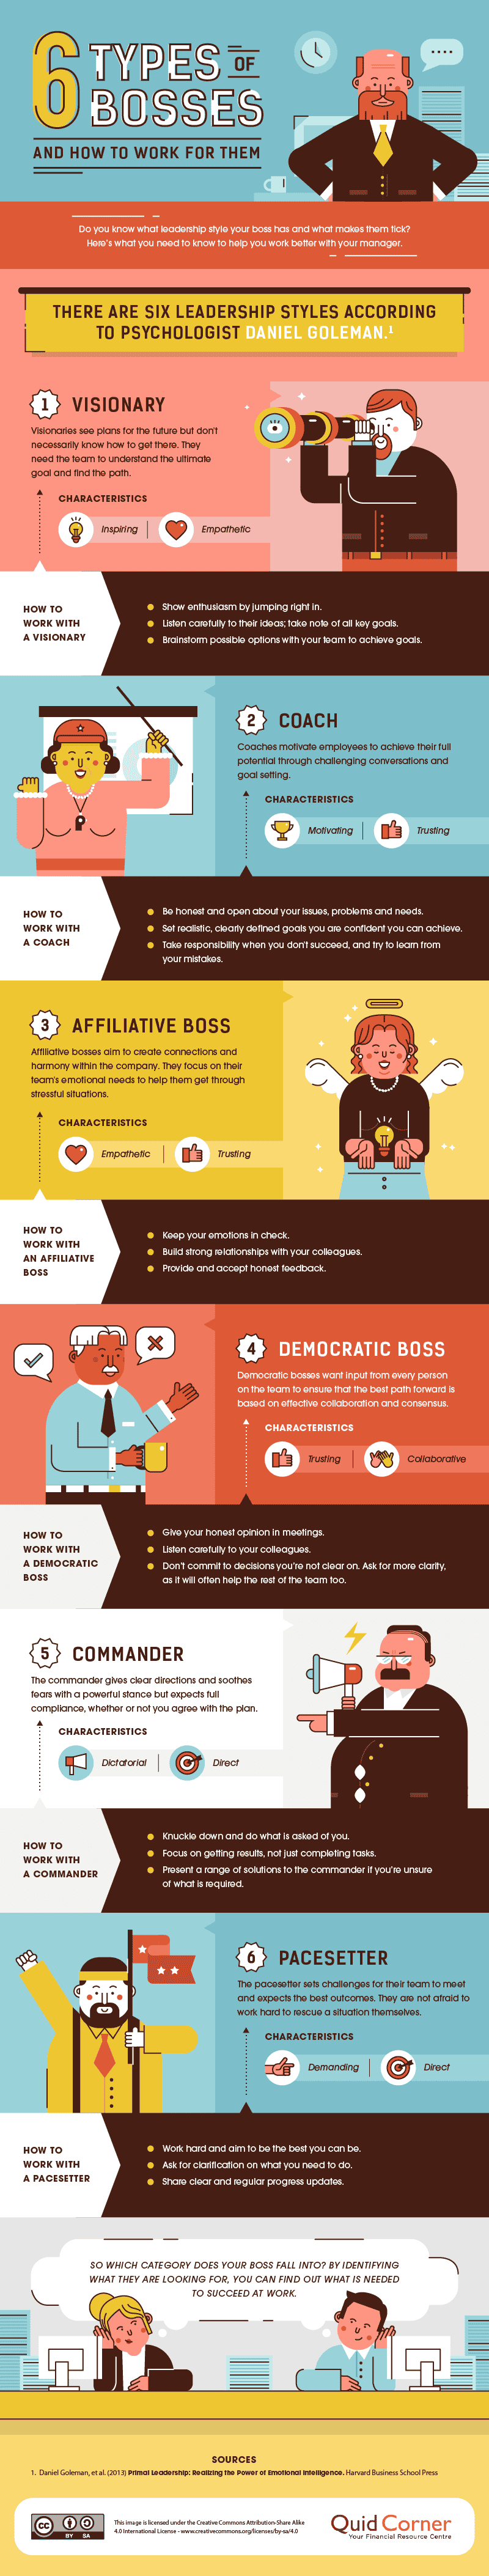 The 6 Types of Bosses (and How to Work For Them) [INFOGRAPHIC]